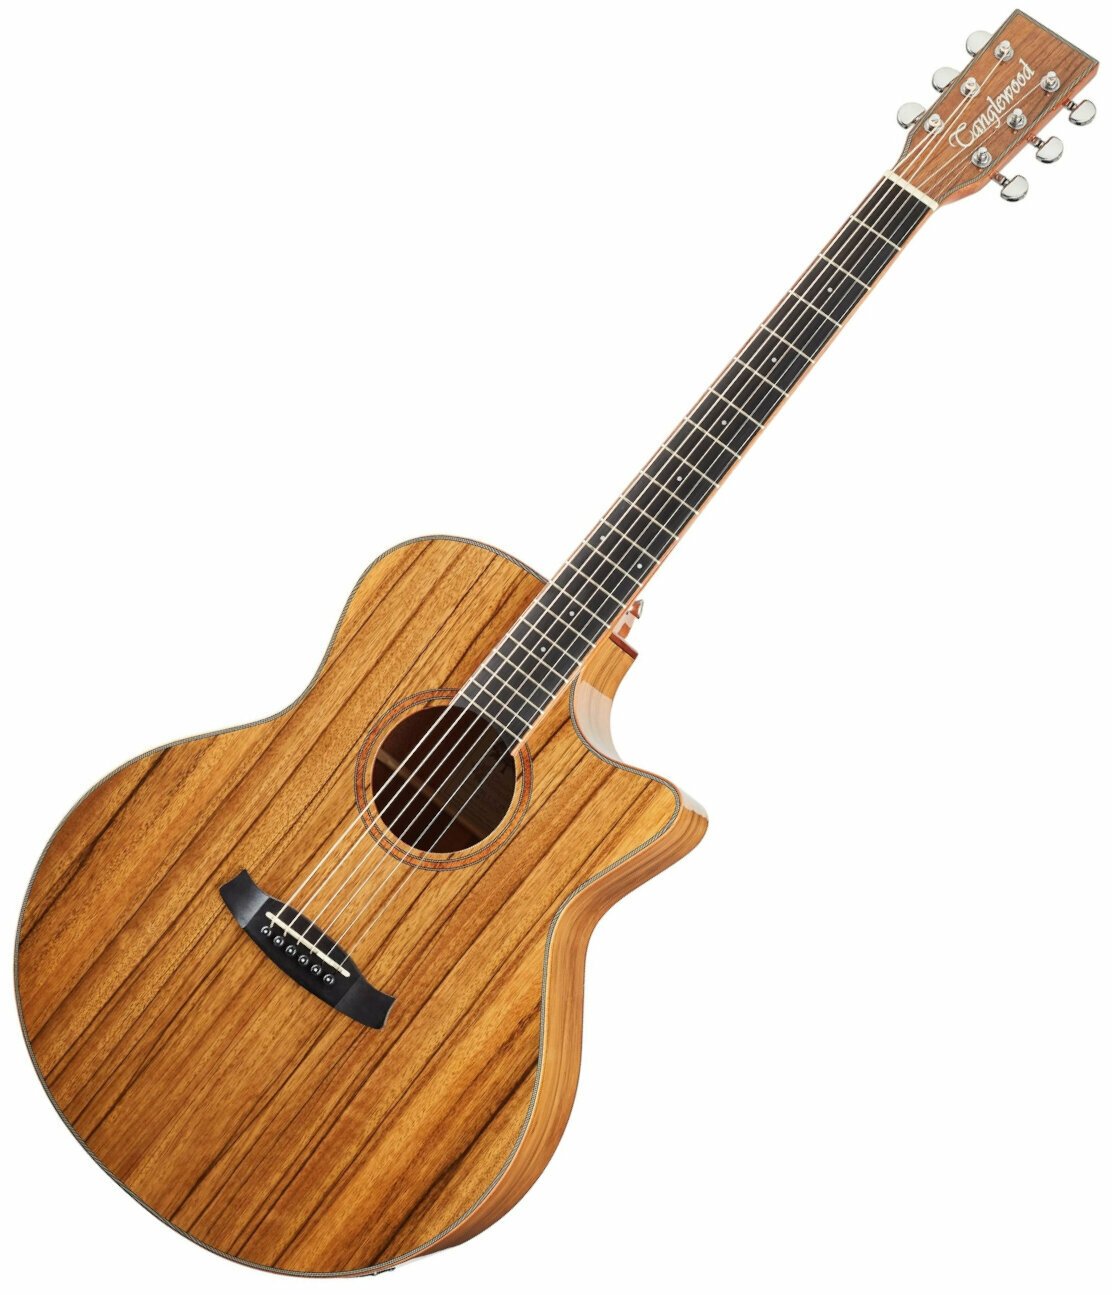 Electro-acoustic guitar Tanglewood TW4 E VC PW Natural